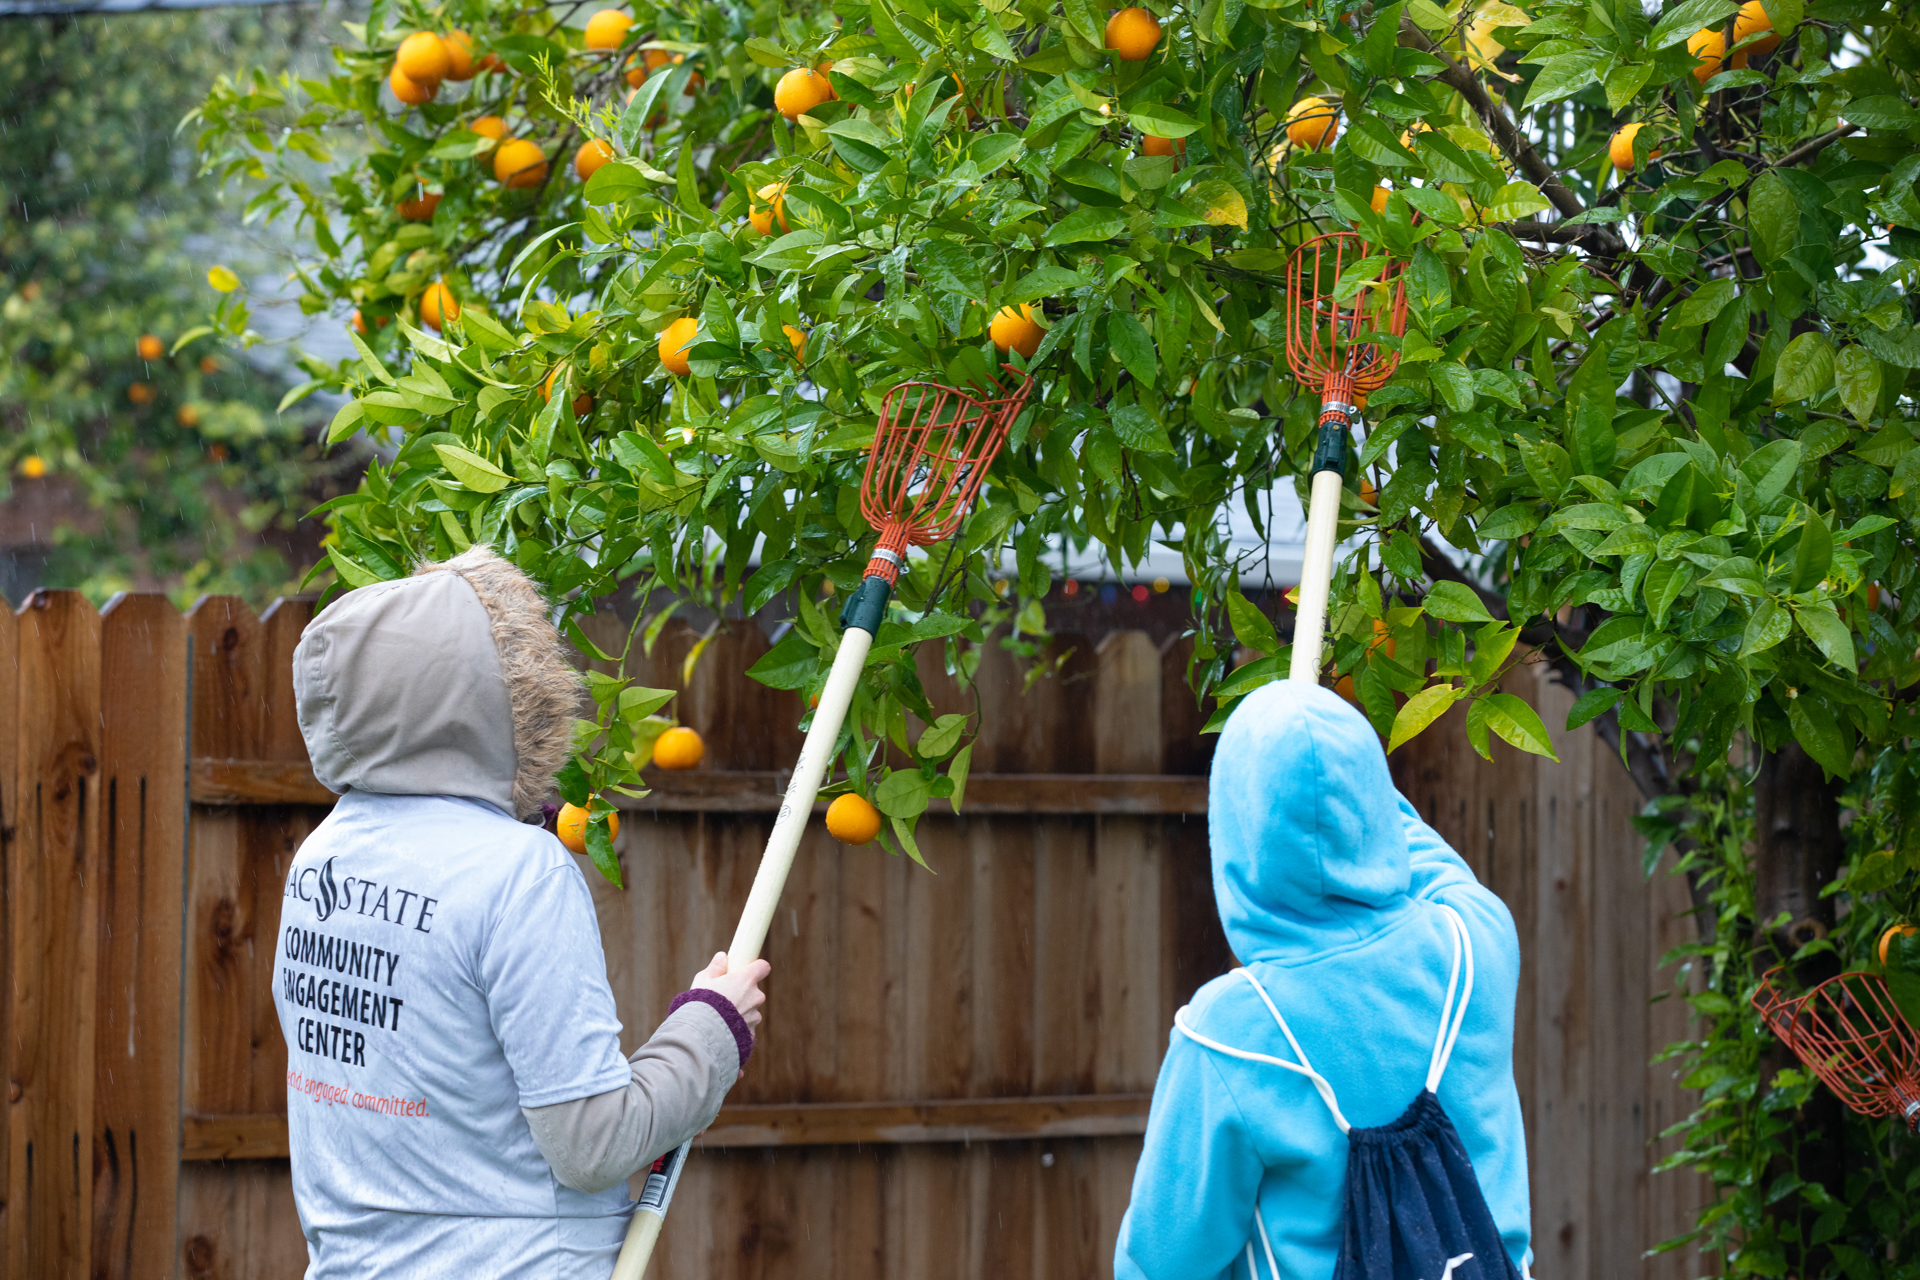 Two students harvesting fruit from a tree